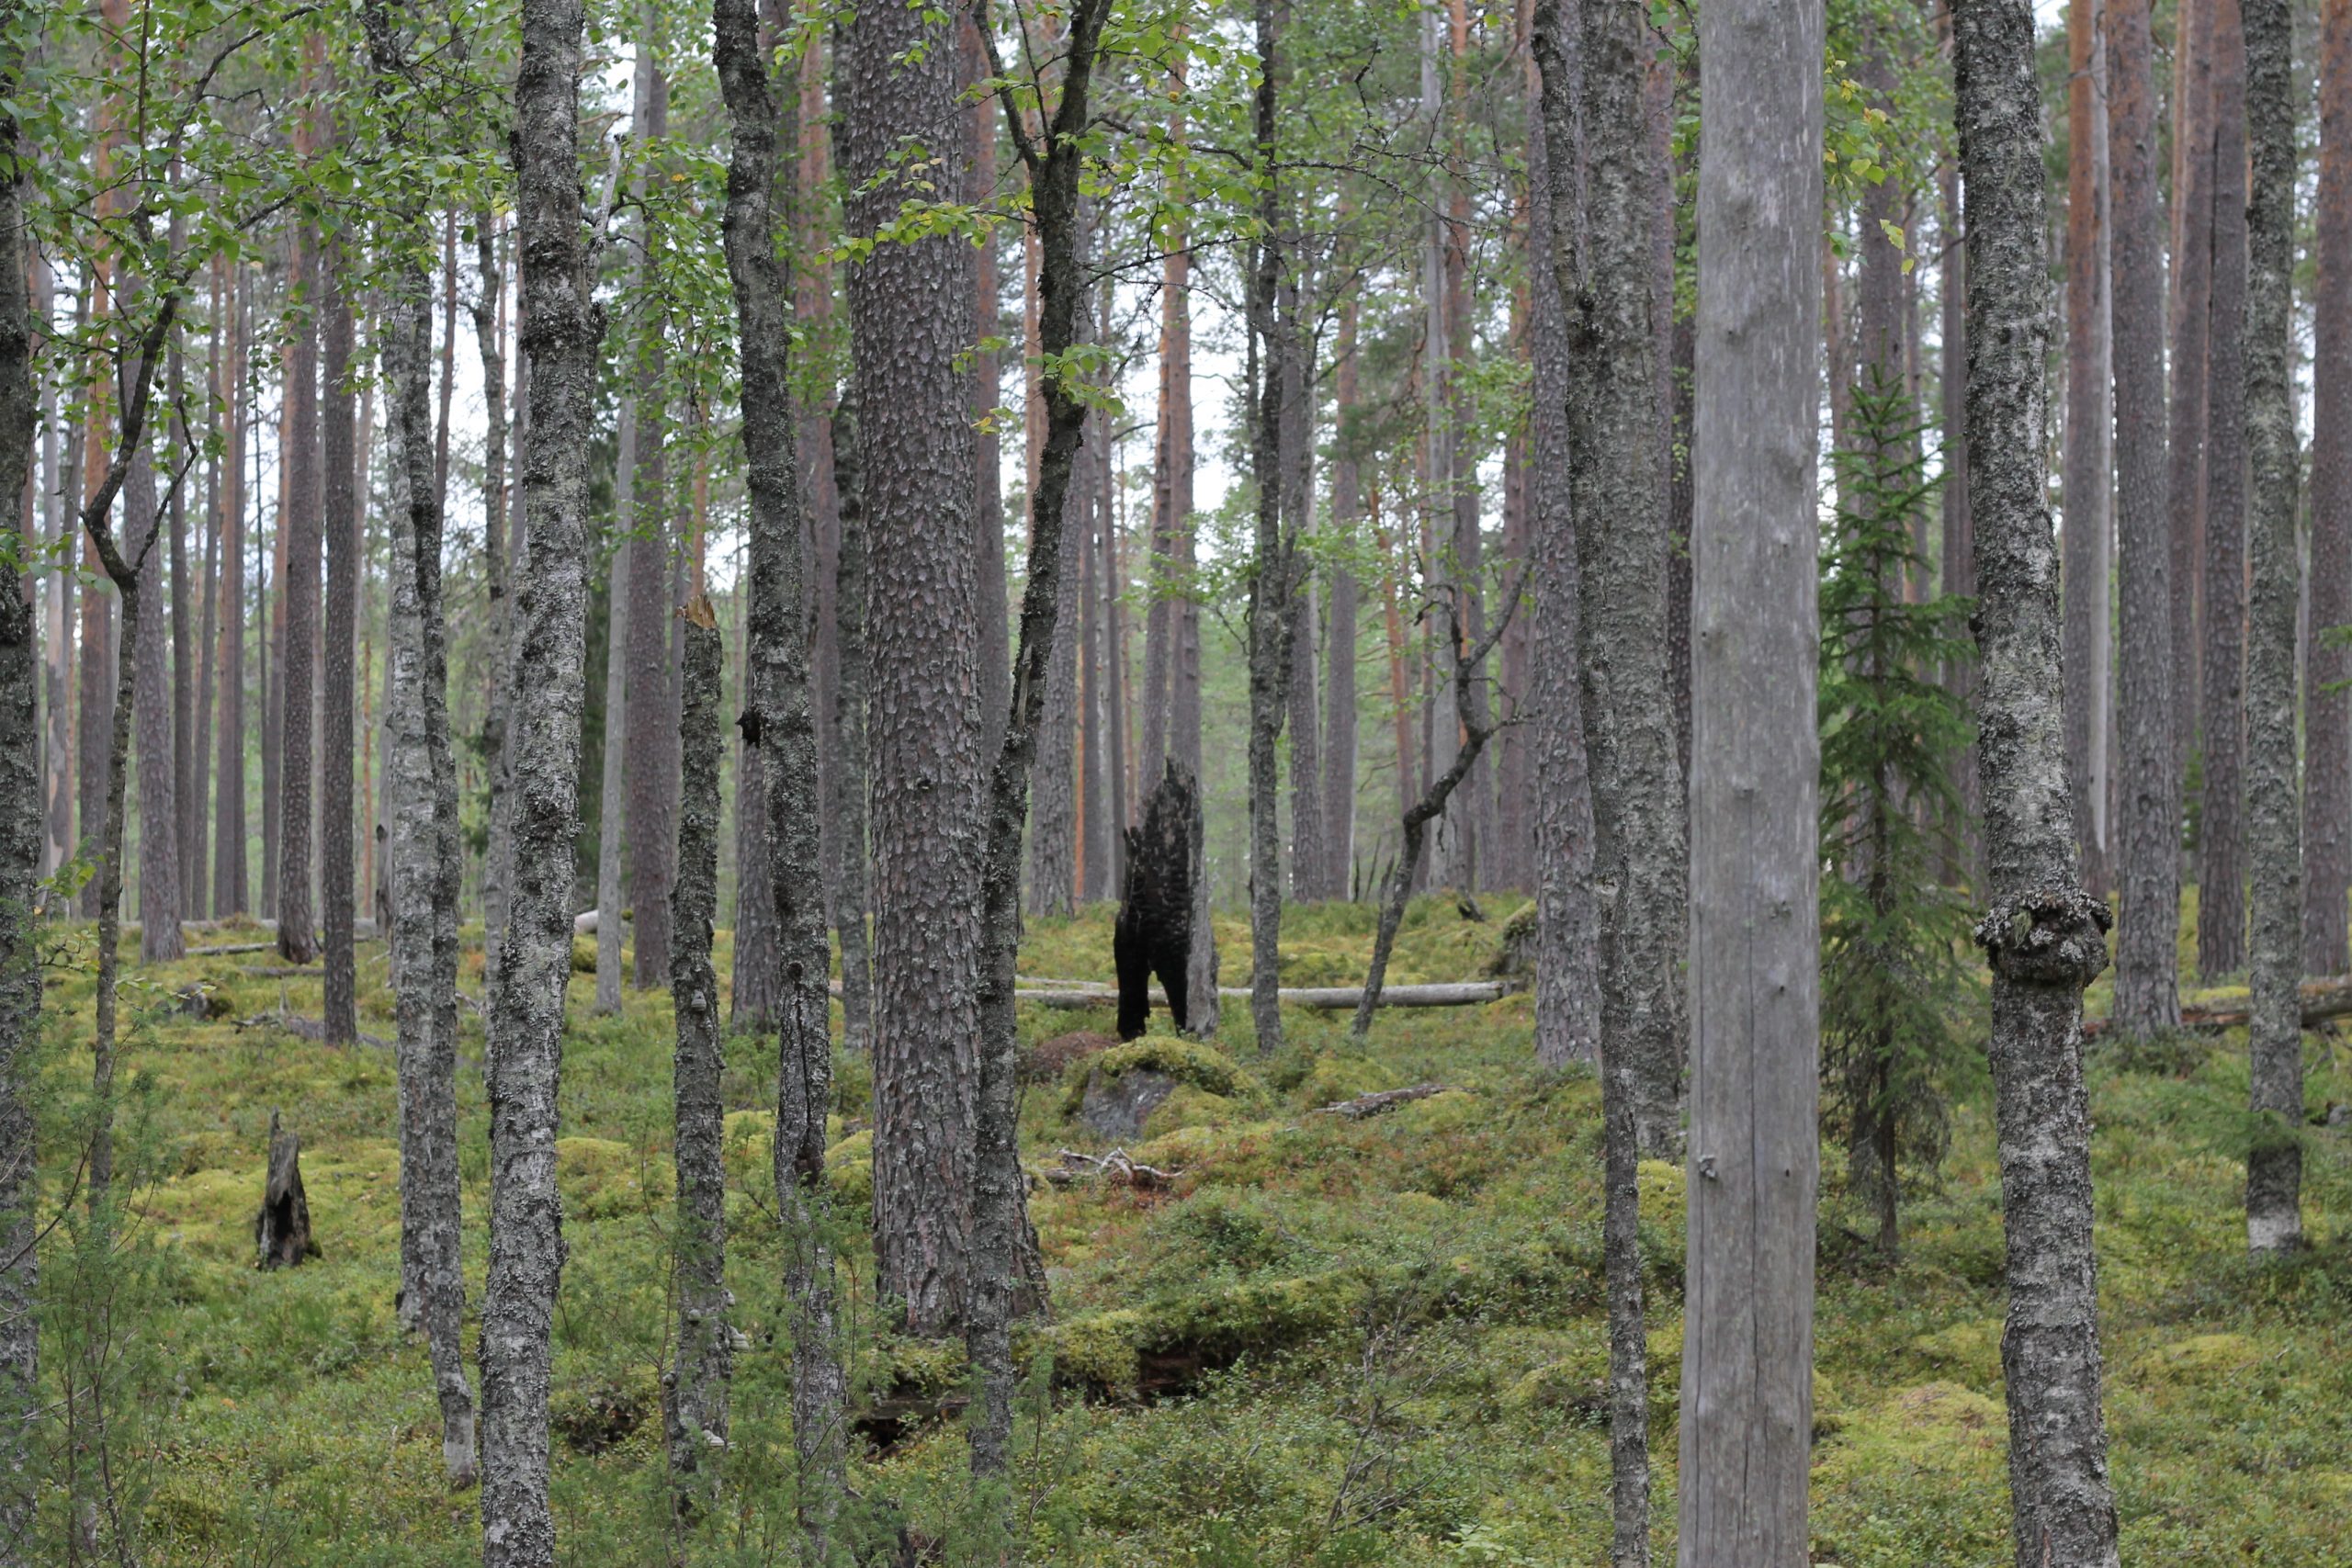 Salamanperä forest and an old charred stump